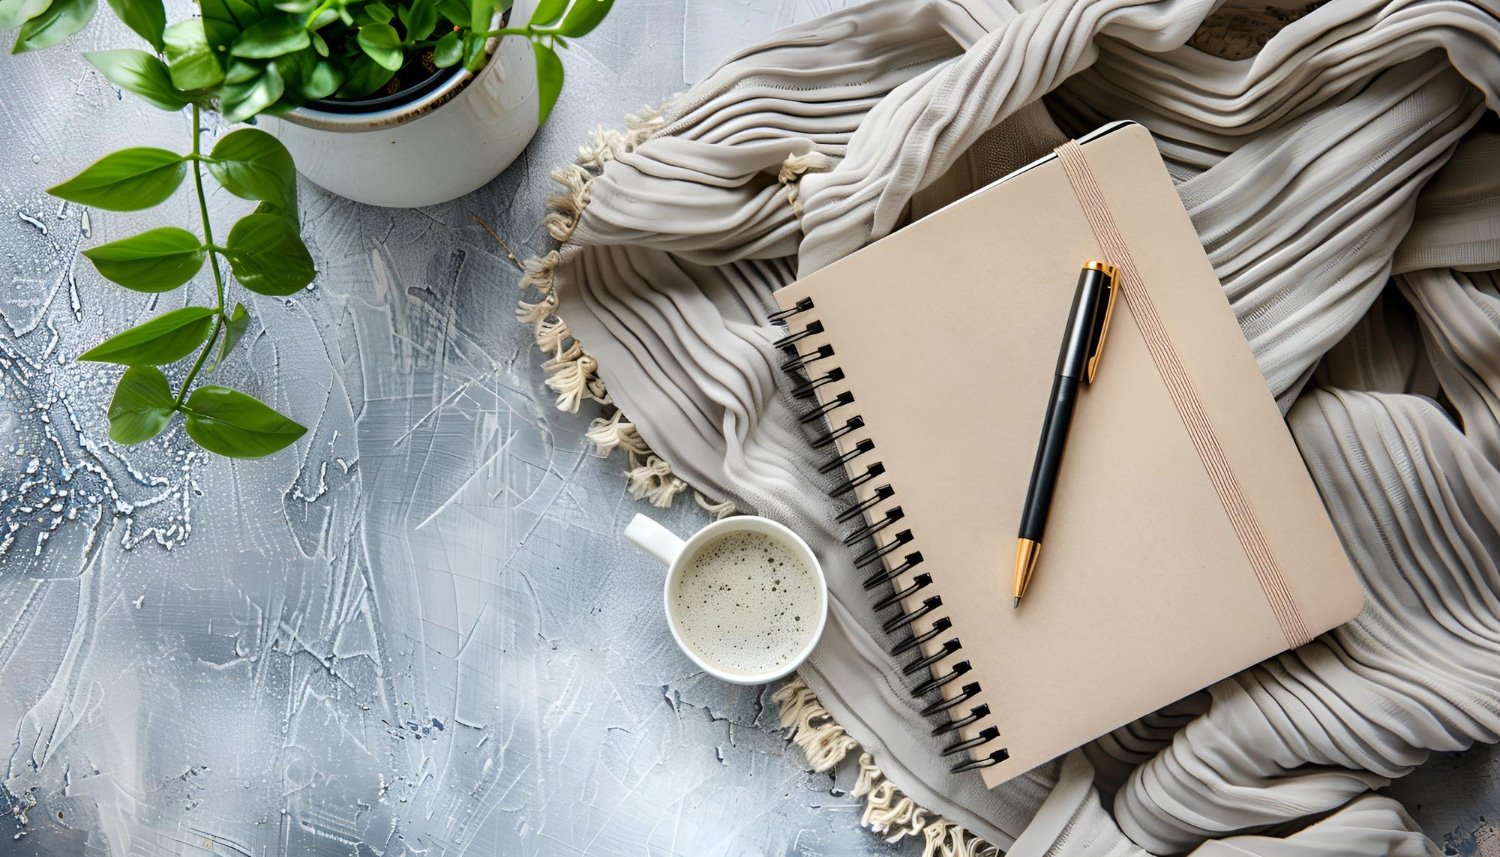 Take Notes In Style With Get Rocketbook’s Reusable Notebooks